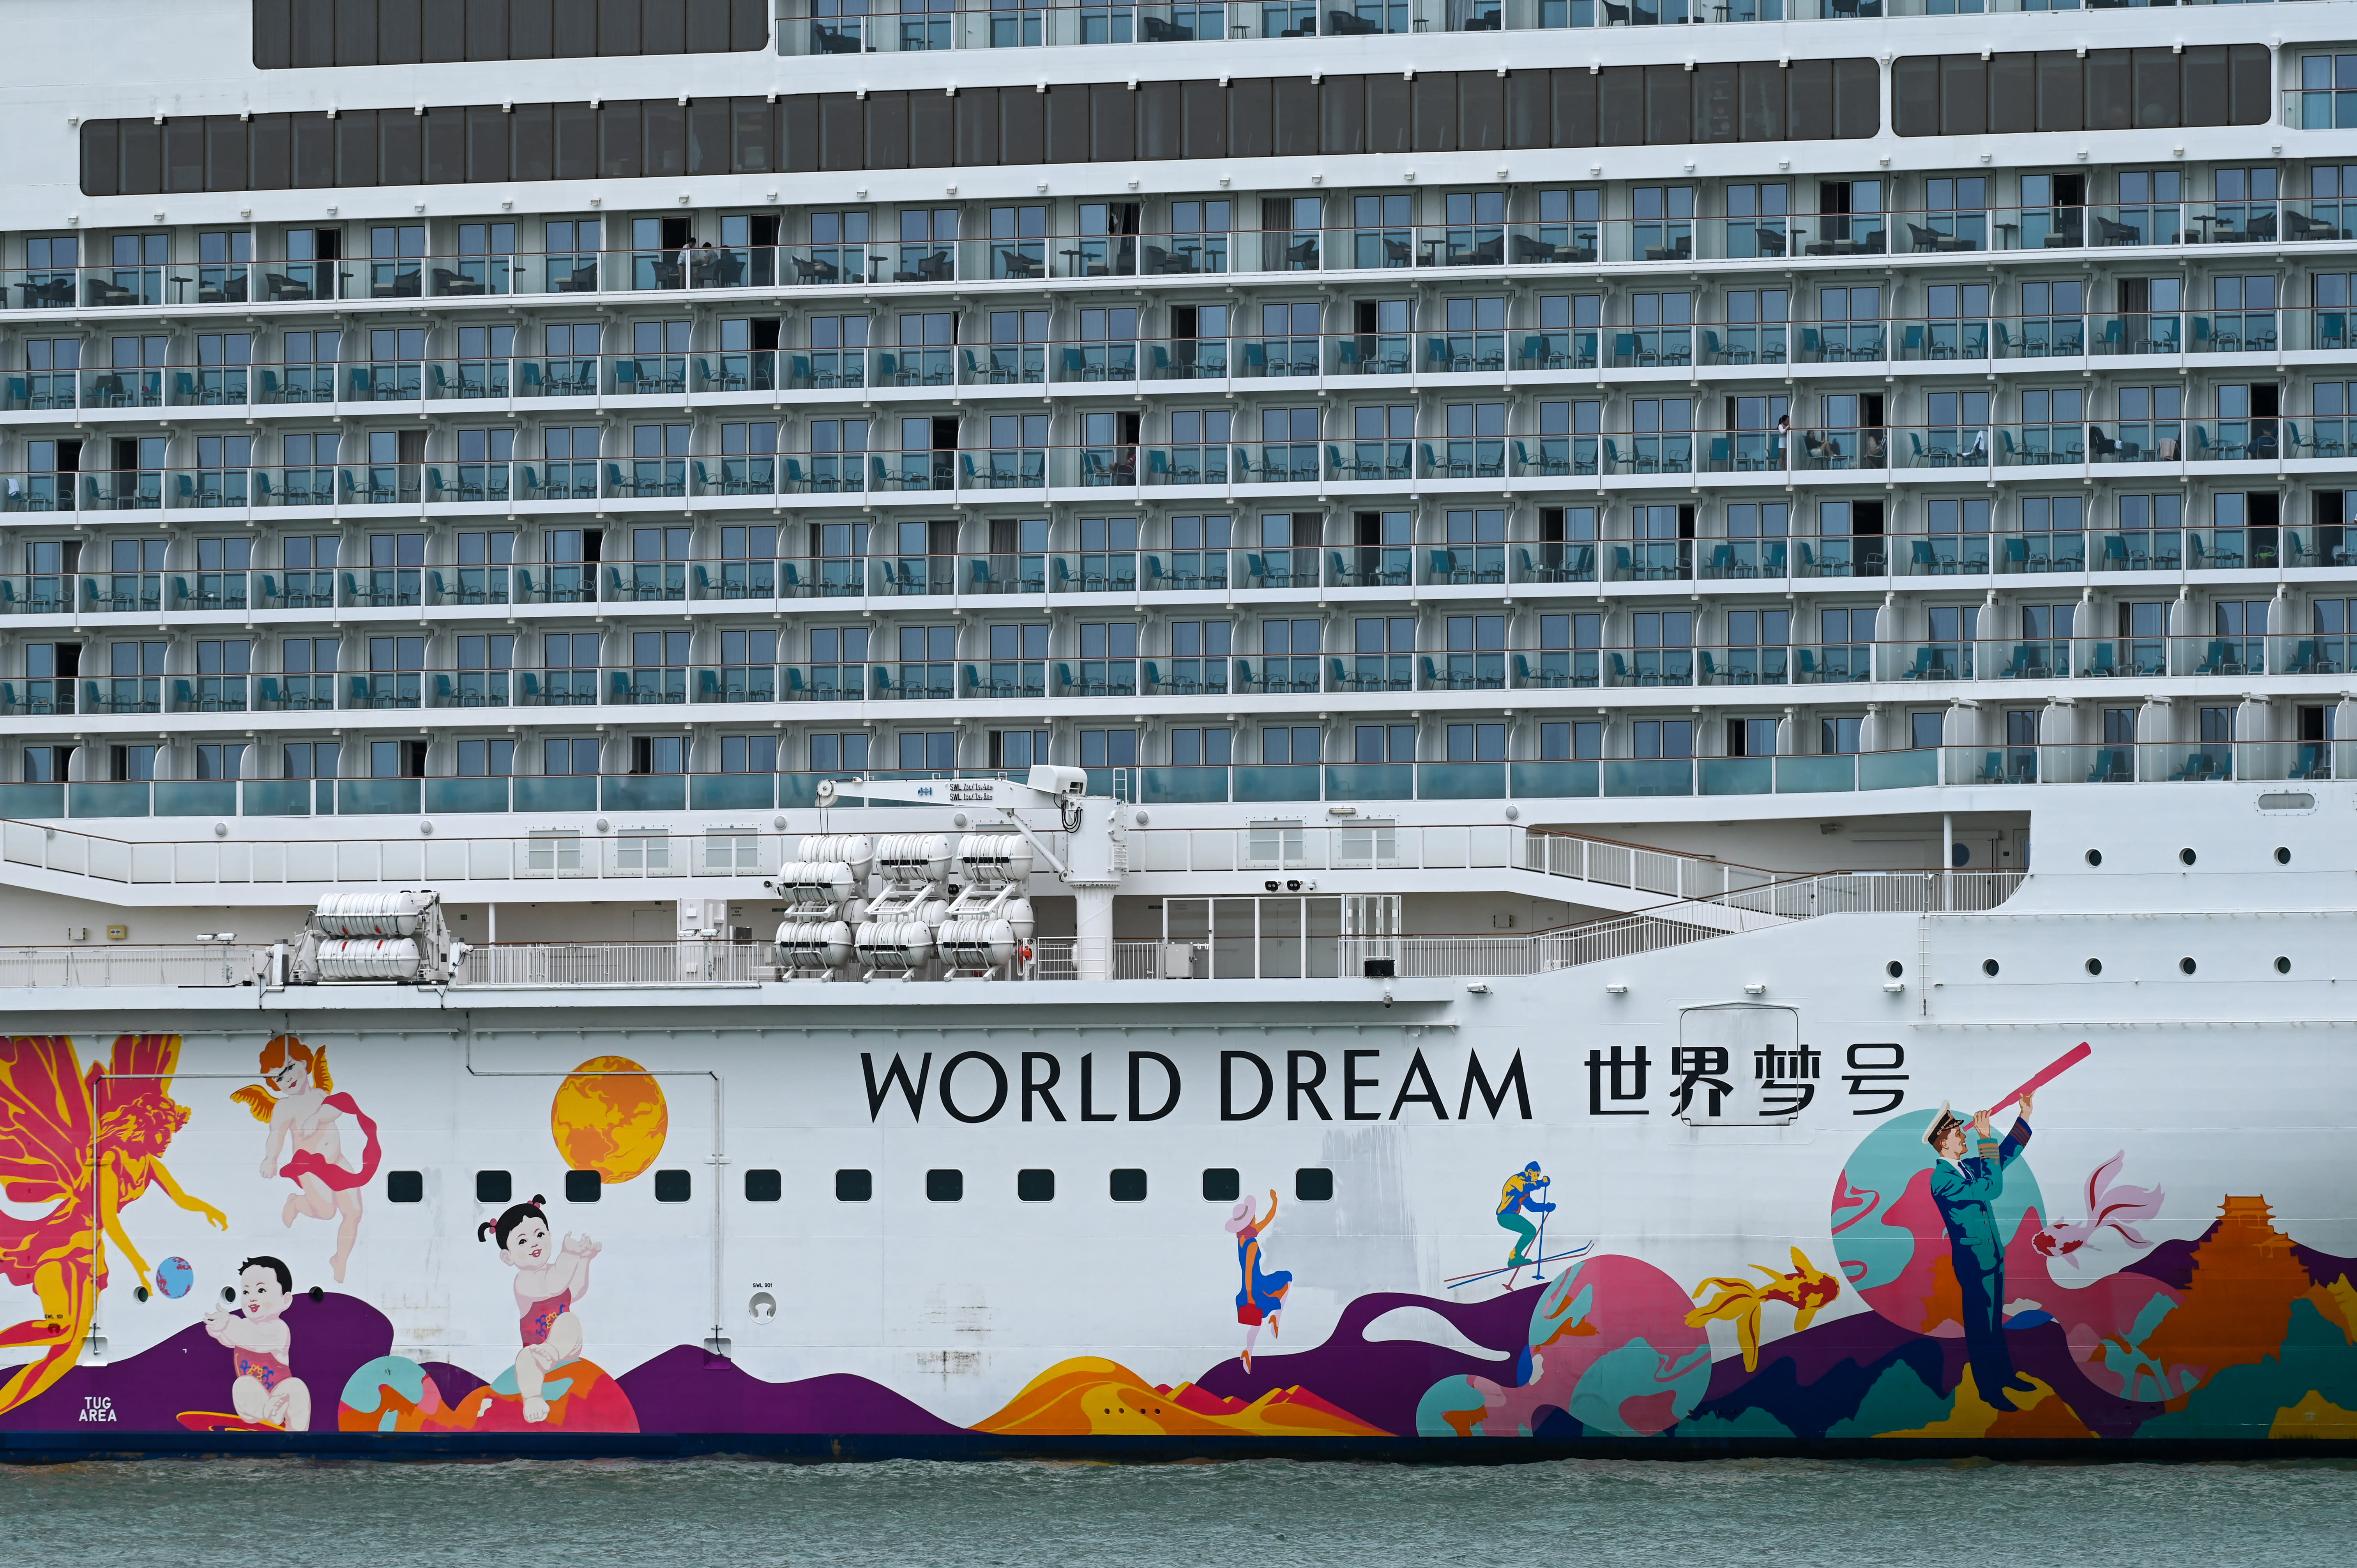 Dream Cruises' World Dream cruise ship docked at the Marina Bay Cruise Centre in Singapore in July 2021.